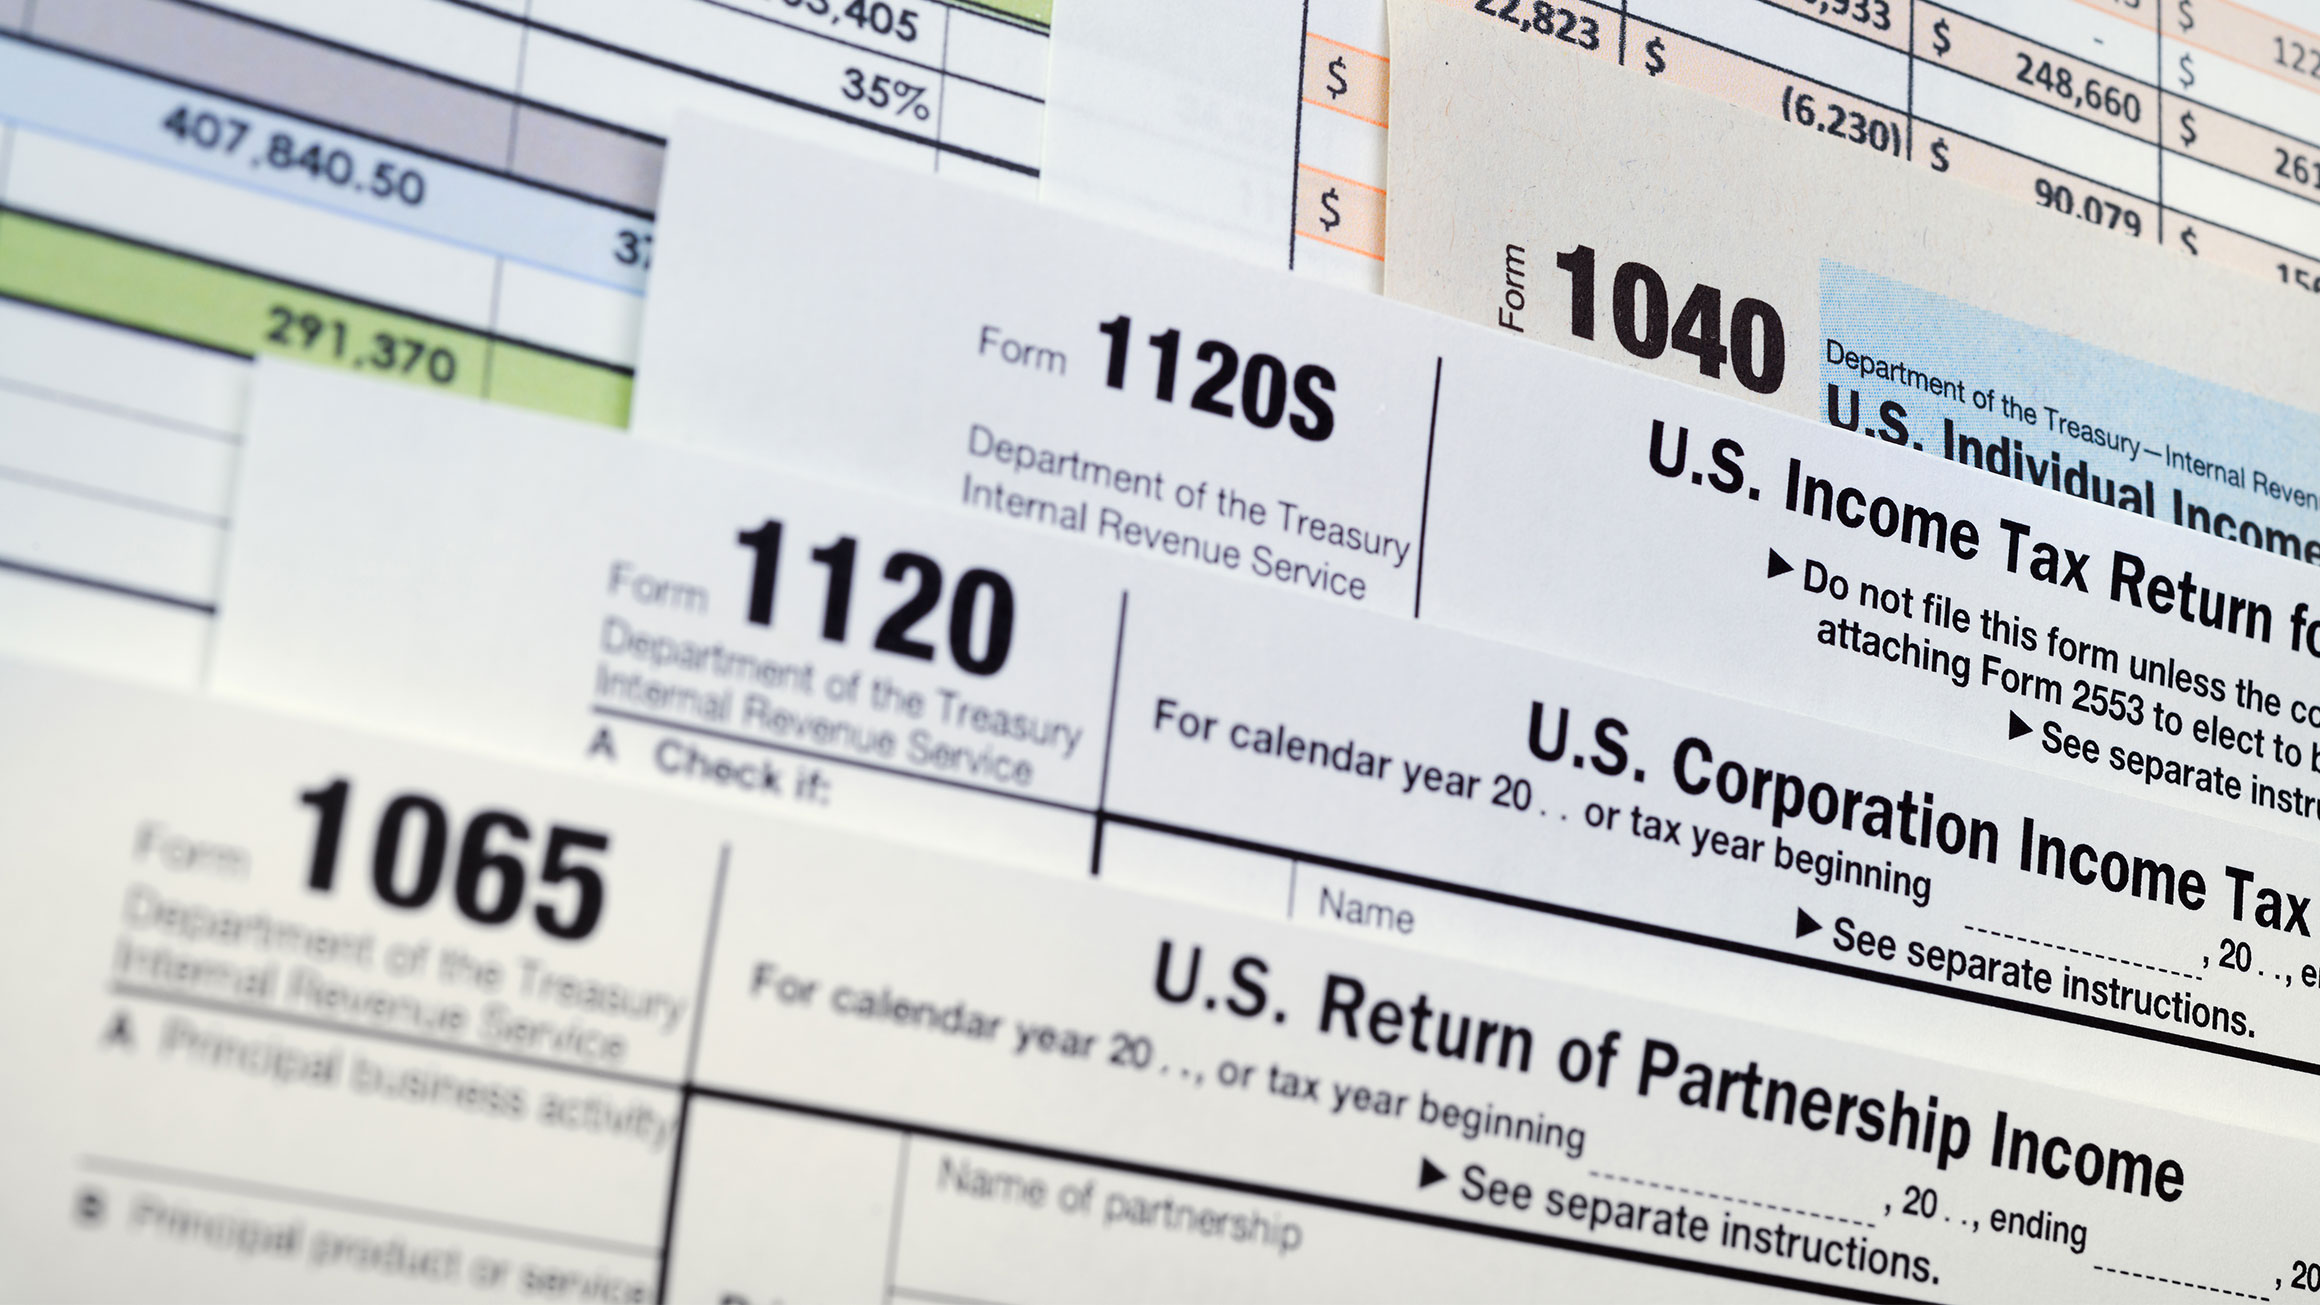 a variety of tax forms are shown